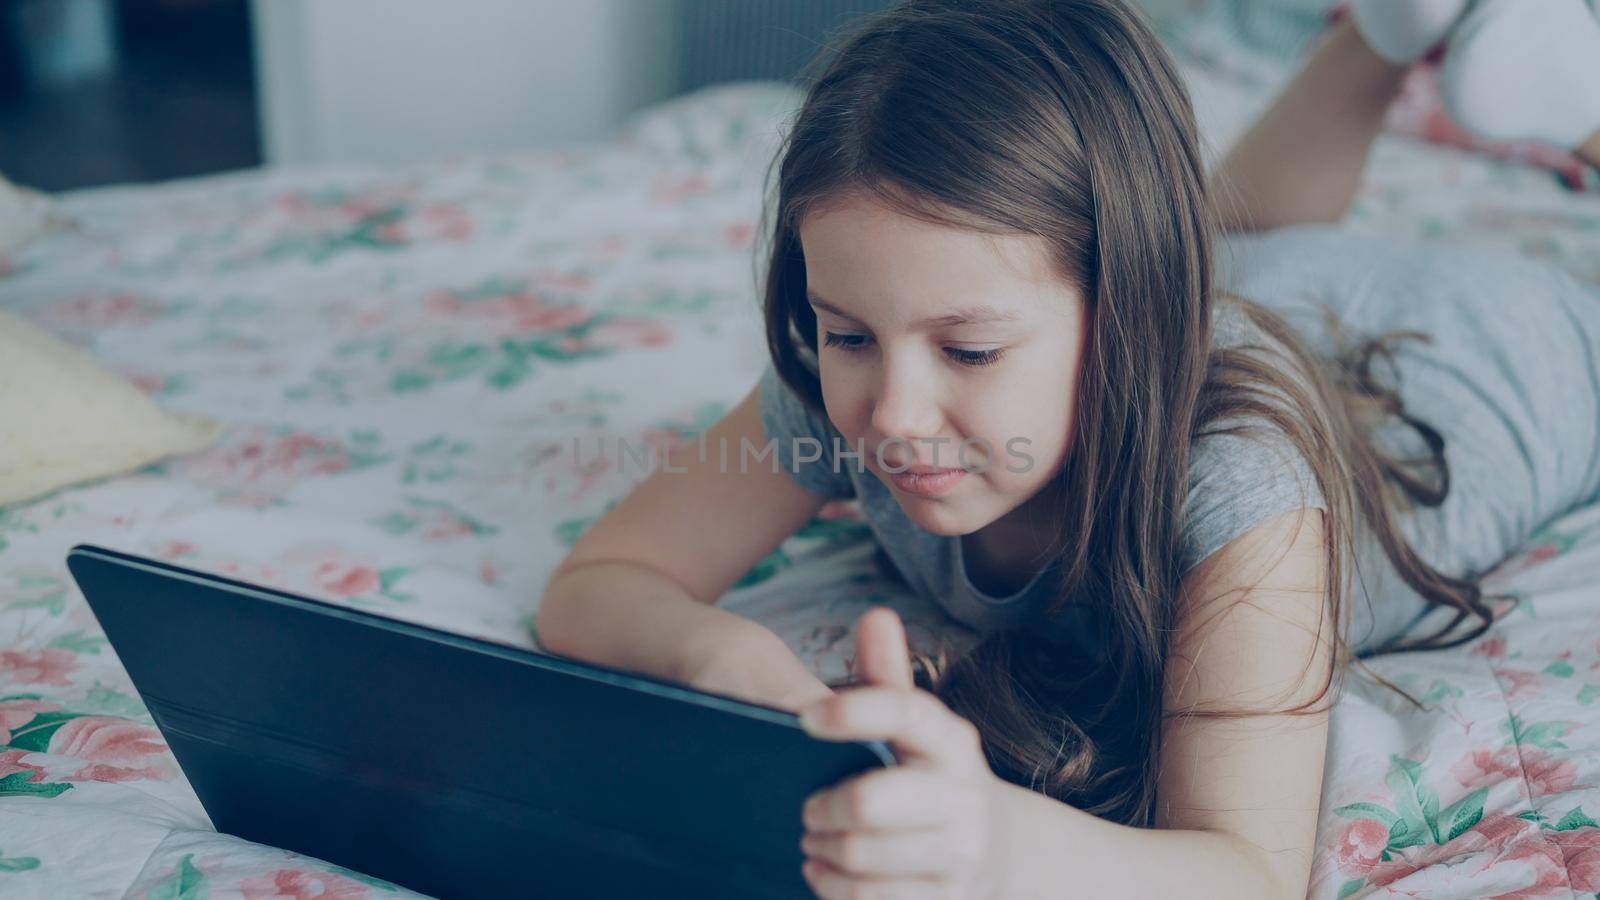 Cute little girl using digital tablet and smiling while lying in bed. Child wathcing cartoon movie on portable device and laughing at home